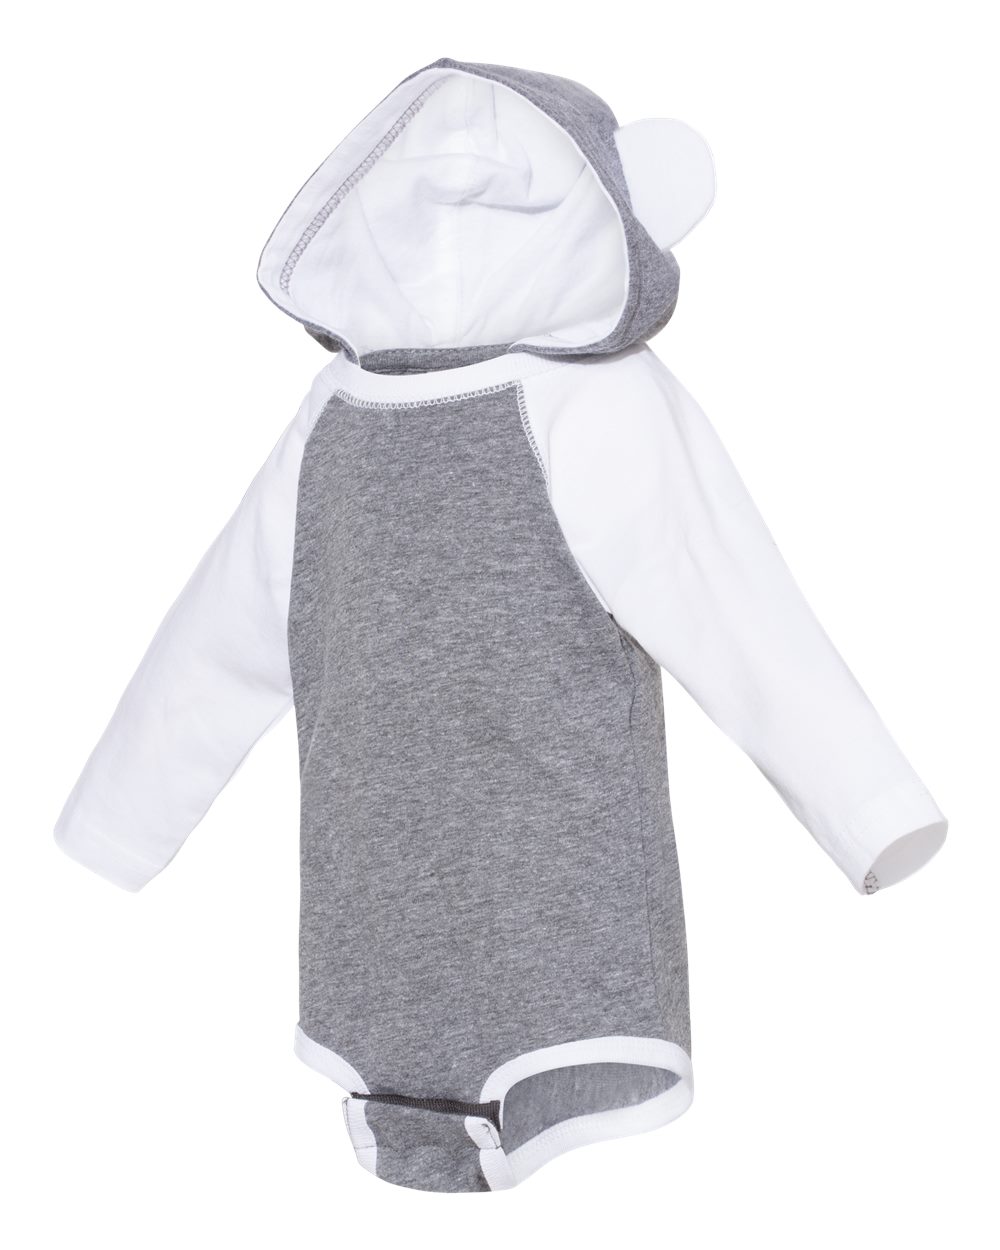 Rabbit Skins 4418 - Fine Jersey Infant Character Hooded Long Sleeve Bodysuit with Ears